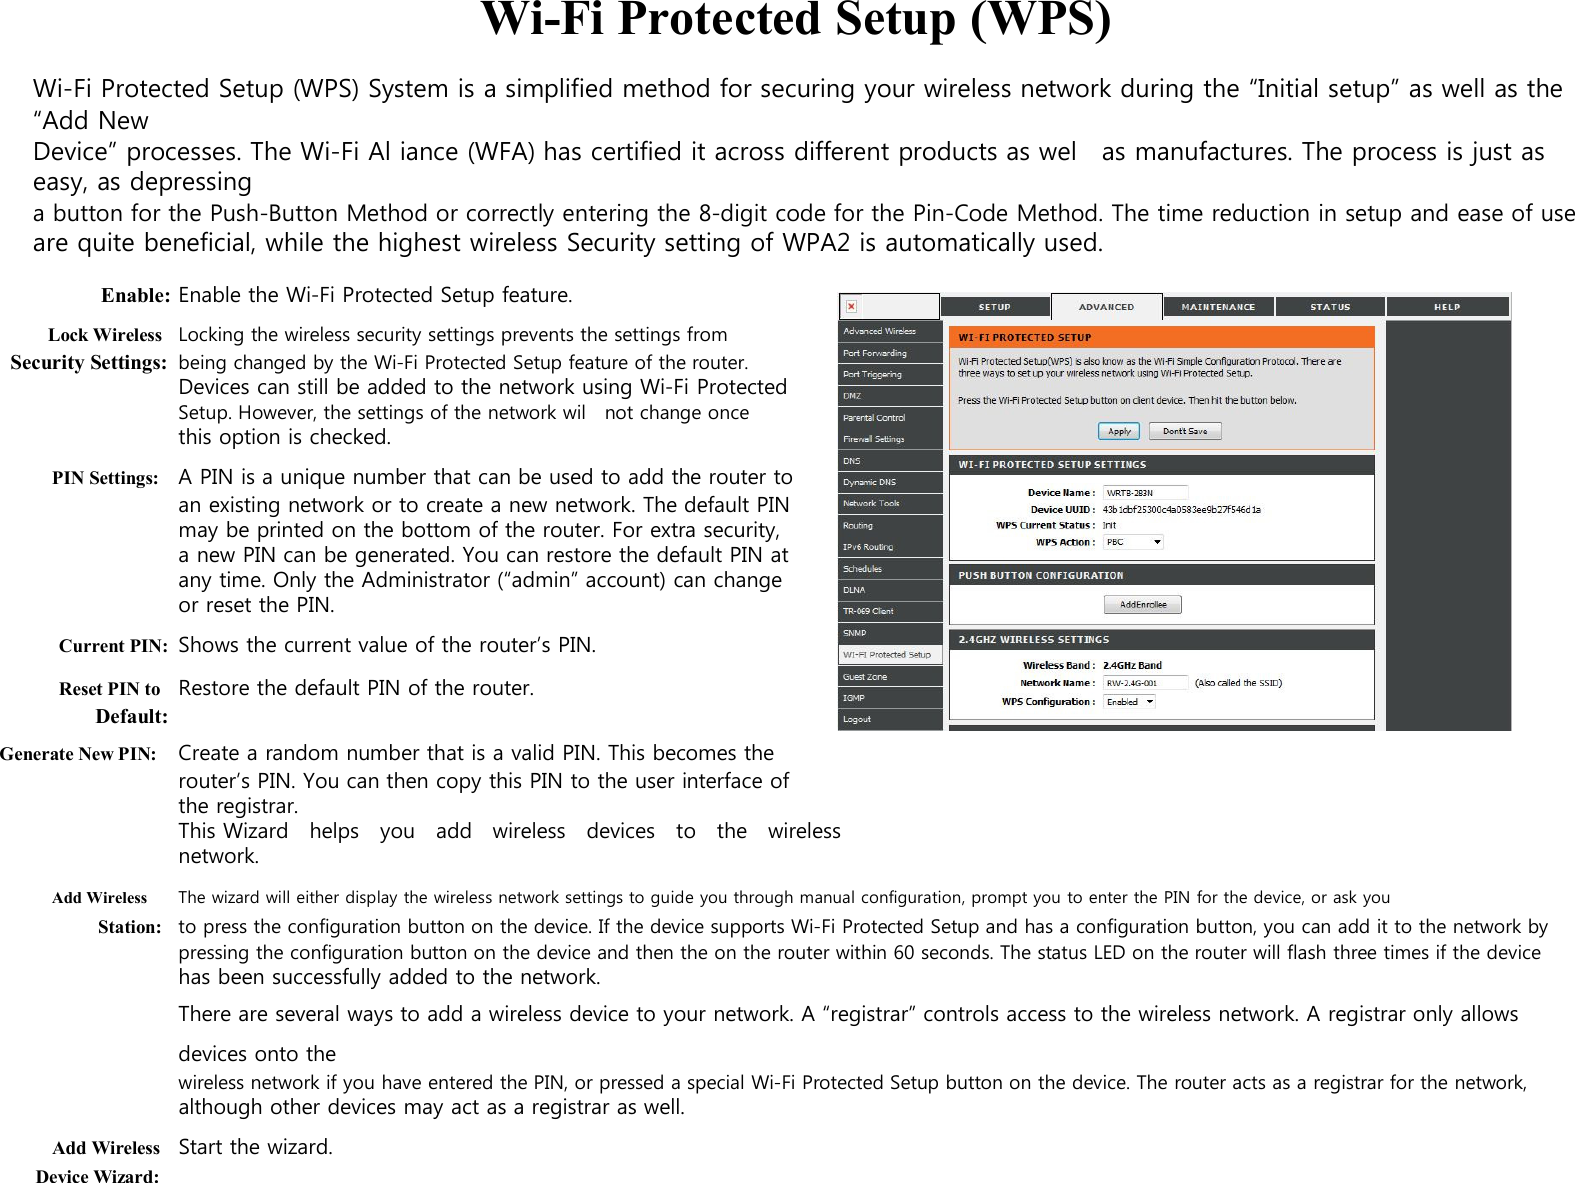  Wi-Fi Protected Setup (WPS)  Wi-Fi Protected Setup (WPS) System is a simplified method for securing your wireless network during the “Initial setup” as well as the “Add New Device” processes. The Wi-Fi Al iance (WFA) has certified it across different products as wel    as manufactures. The process is just as easy, as depressing a button for the Push-Button Method or correctly entering the 8-digit code for the Pin-Code Method. The time reduction in setup and ease of use are quite beneficial, while the highest wireless Security setting of WPA2 is automatically used.  Enable: Enable the Wi-Fi Protected Setup feature. Lock Wireless Locking the wireless security settings prevents the settings from Security Settings: being changed by the Wi-Fi Protected Setup feature of the router. Devices can still be added to the network using Wi-Fi Protected Setup. However, the settings of the network wil    not change once this option is checked. PIN Settings: A PIN is a unique number that can be used to add the router to an existing network or to create a new network. The default PIN may be printed on the bottom of the router. For extra security, a new PIN can be generated. You can restore the default PIN at any time. Only the Administrator (“admin” account) can change or reset the PIN. Current PIN: Shows the current value of the router’s PIN. Reset PIN to Restore the default PIN of the router. Default: Generate New PIN: Create a random number that is a valid PIN. This becomes the router’s PIN. You can then copy this PIN to the user interface of the registrar. This Wizard   helps   you    add   wireless    devices    to    the   wireless network. Add Wireless The wizard will either display the wireless network settings to guide you through manual configuration, prompt you to enter the PIN for the device, or ask you Station: to press the configuration button on the device. If the device supports Wi-Fi Protected Setup and has a configuration button, you can add it to the network by pressing the configuration button on the device and then the on the router within 60 seconds. The status LED on the router will flash three times if the device has been successfully added to the network. There are several ways to add a wireless device to your network. A “registrar” controls access to the wireless network. A registrar only allows devices onto the wireless network if you have entered the PIN, or pressed a special Wi-Fi Protected Setup button on the device. The router acts as a registrar for the network, although other devices may act as a registrar as well. Add Wireless Start the wizard. Device Wizard: 